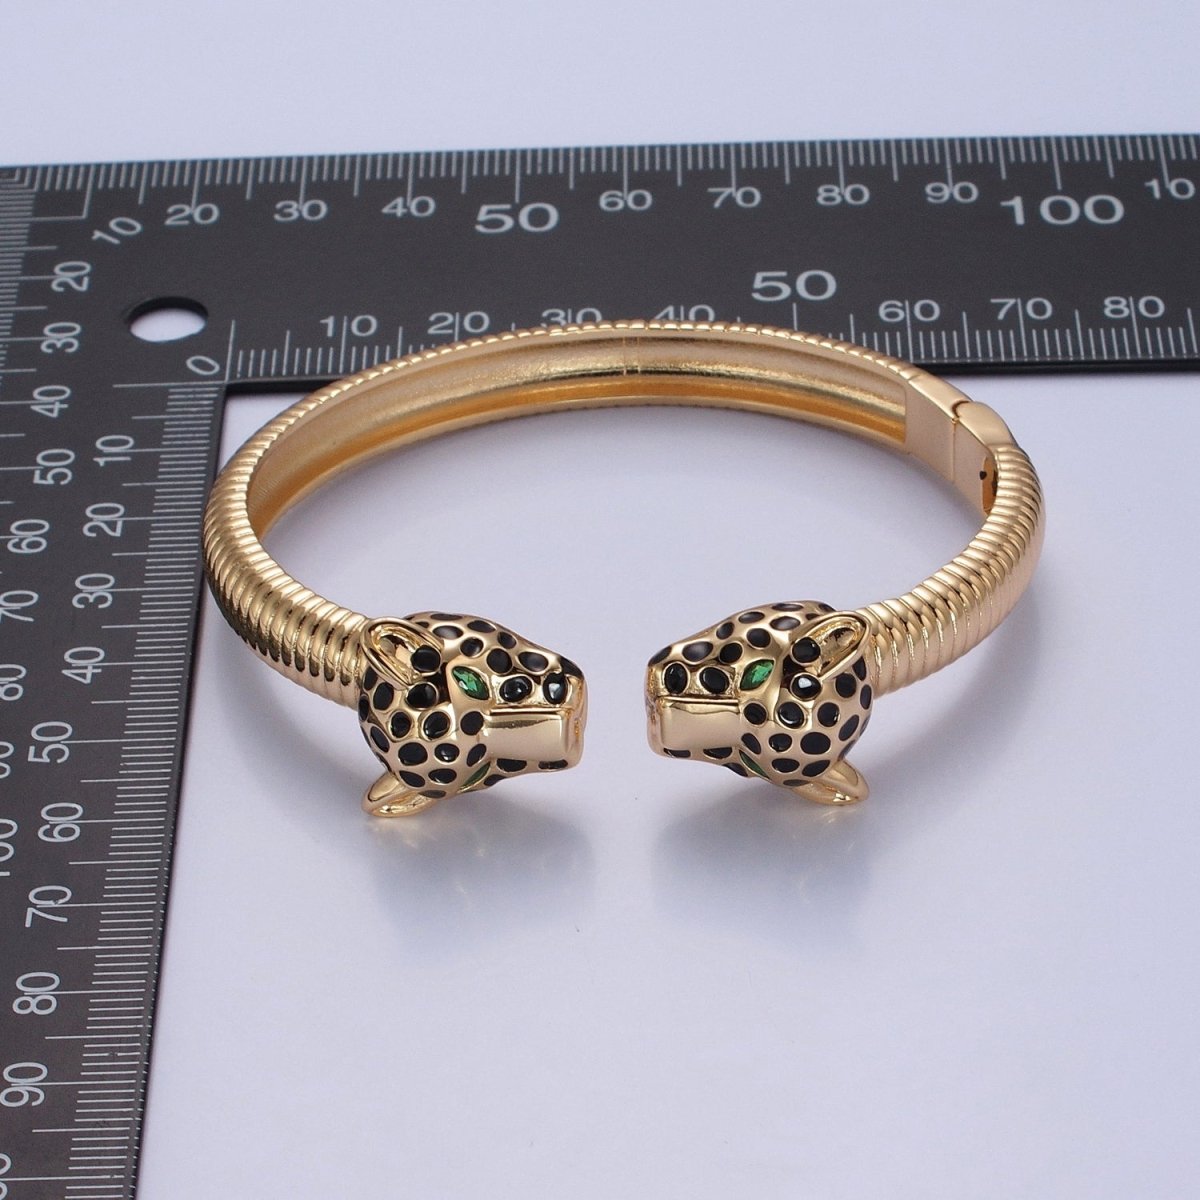 24K Gold Filled Cat Cheetah Bangle Bracelet in silver & gold | WA-990 WA-991 Clearance Pricing - DLUXCA